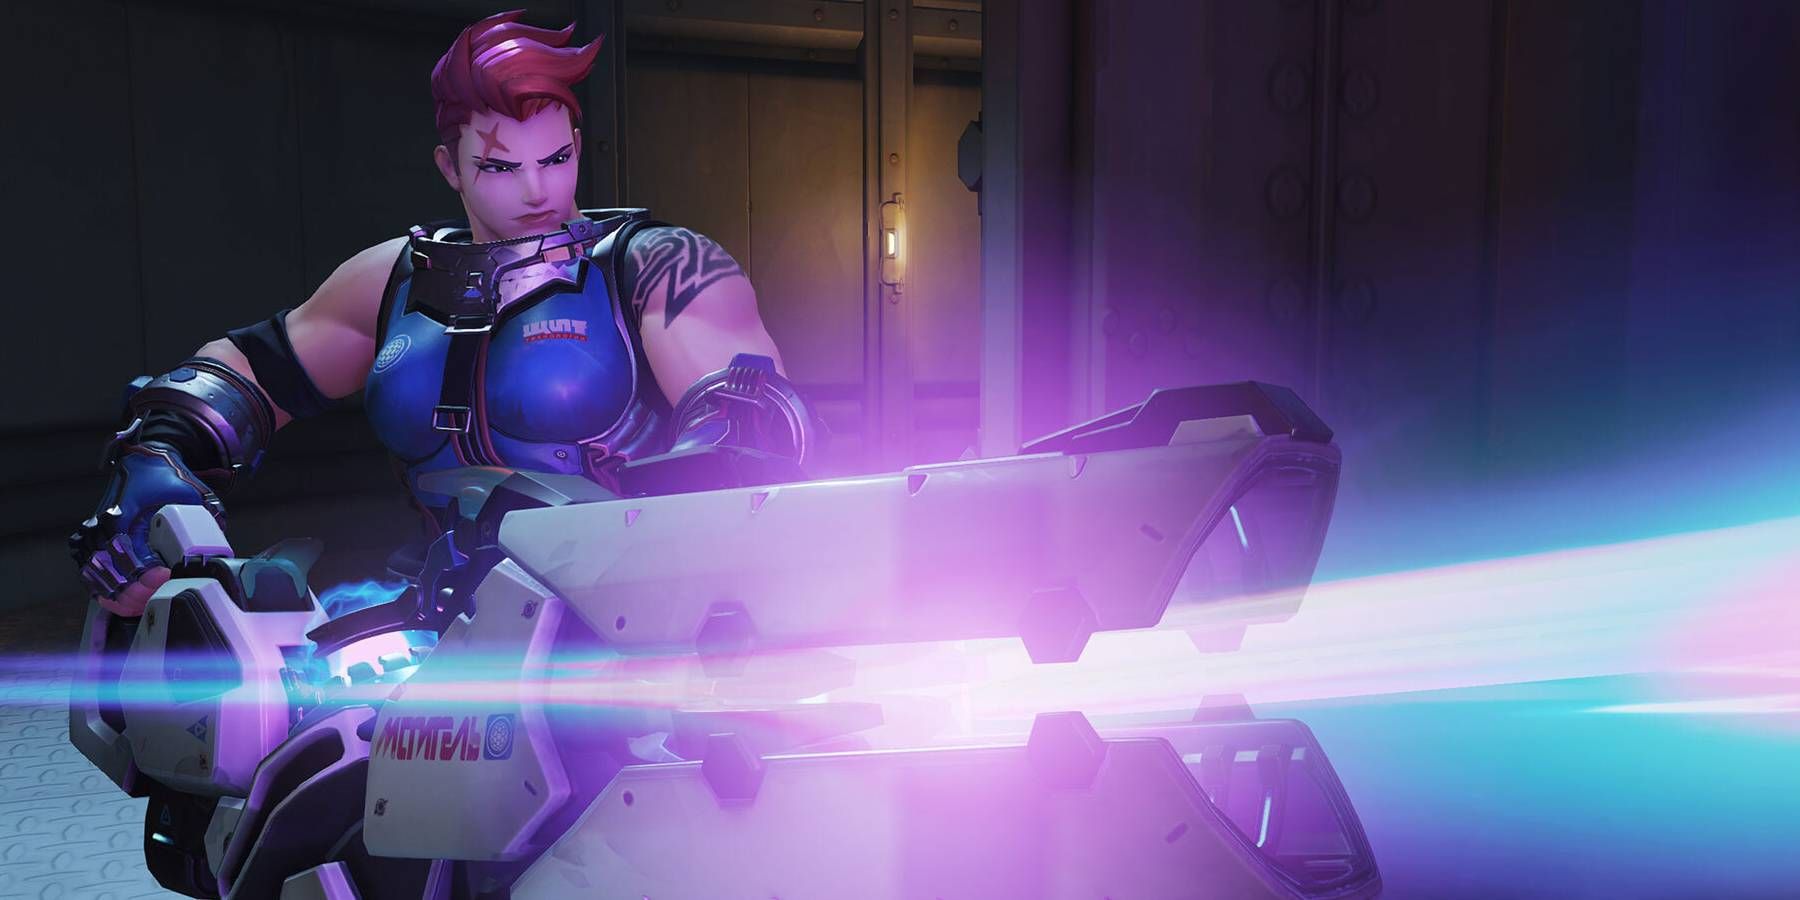 Overwatch 2 Zarya Firing Particle Cannon Play of the Game Pose on El Dorado Map